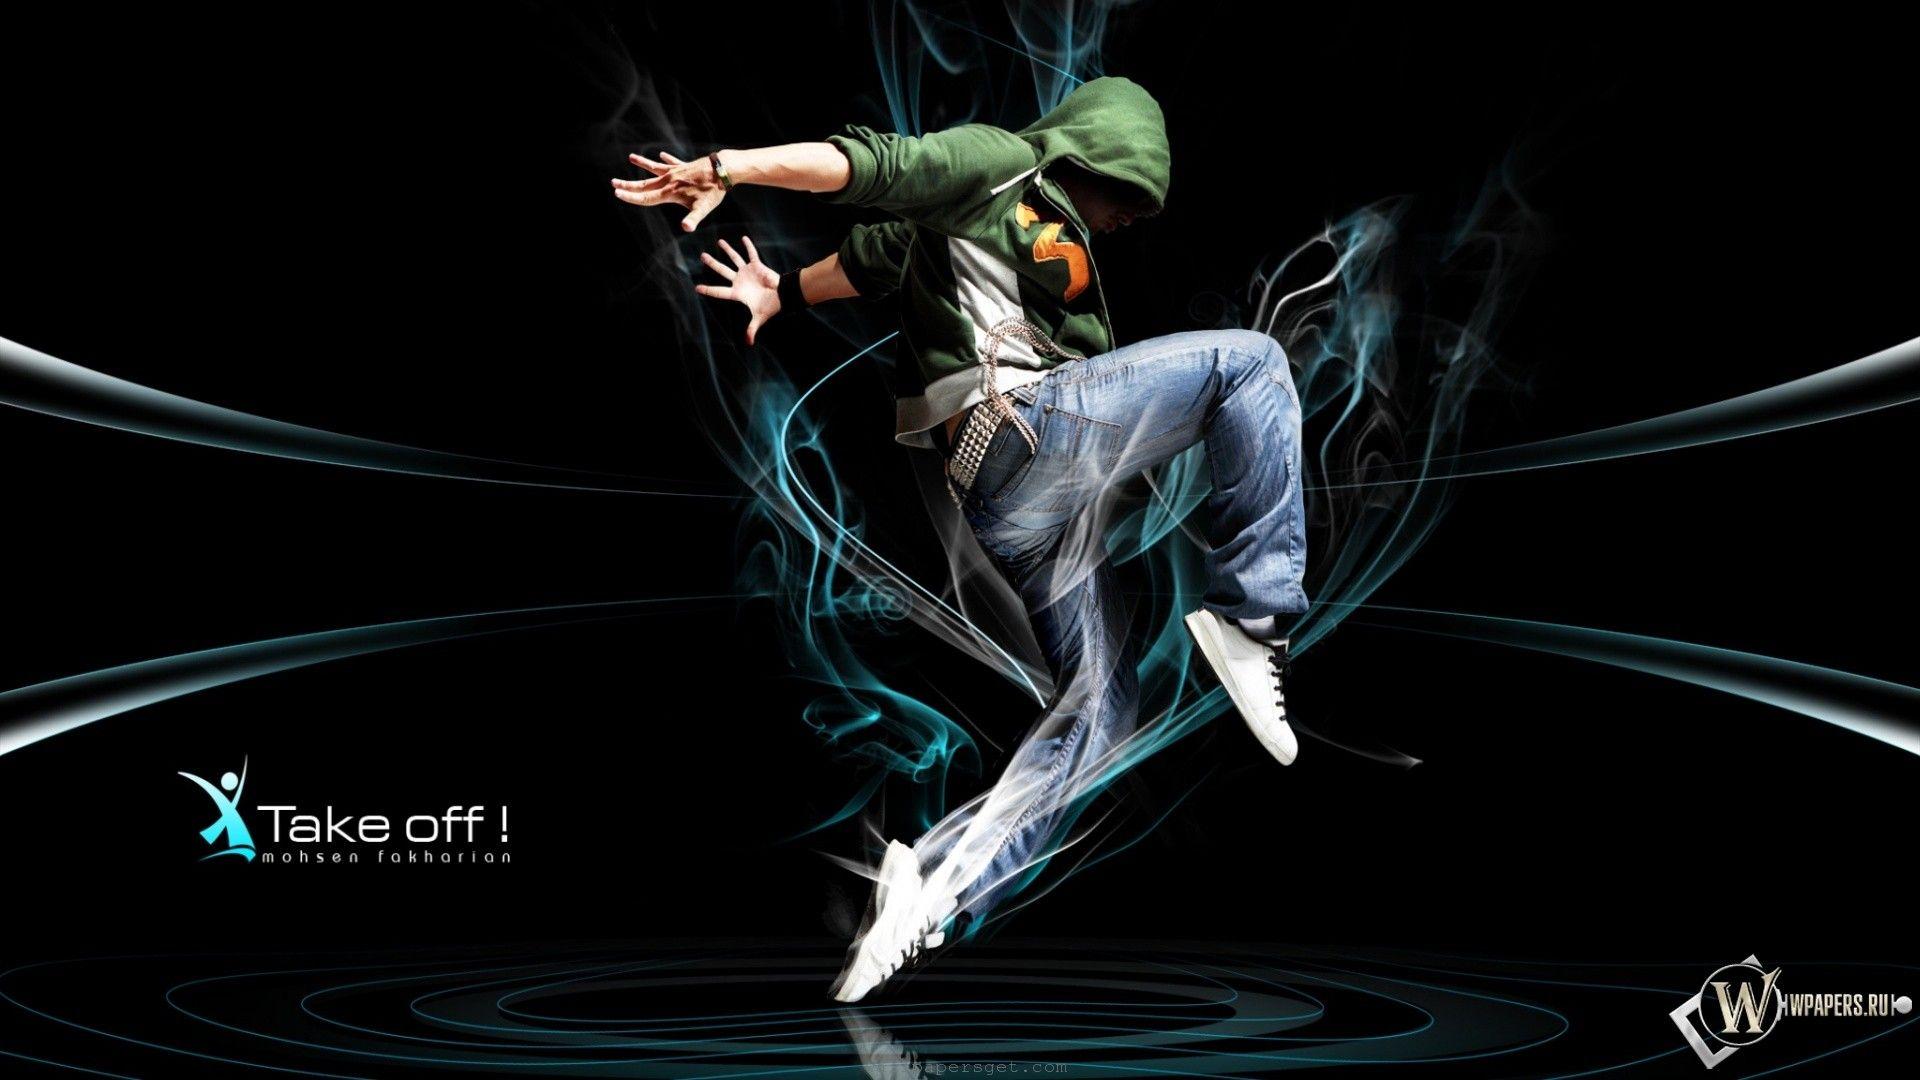 Abstract Dance Wallpaper, Awesome Abstract Dance Picture